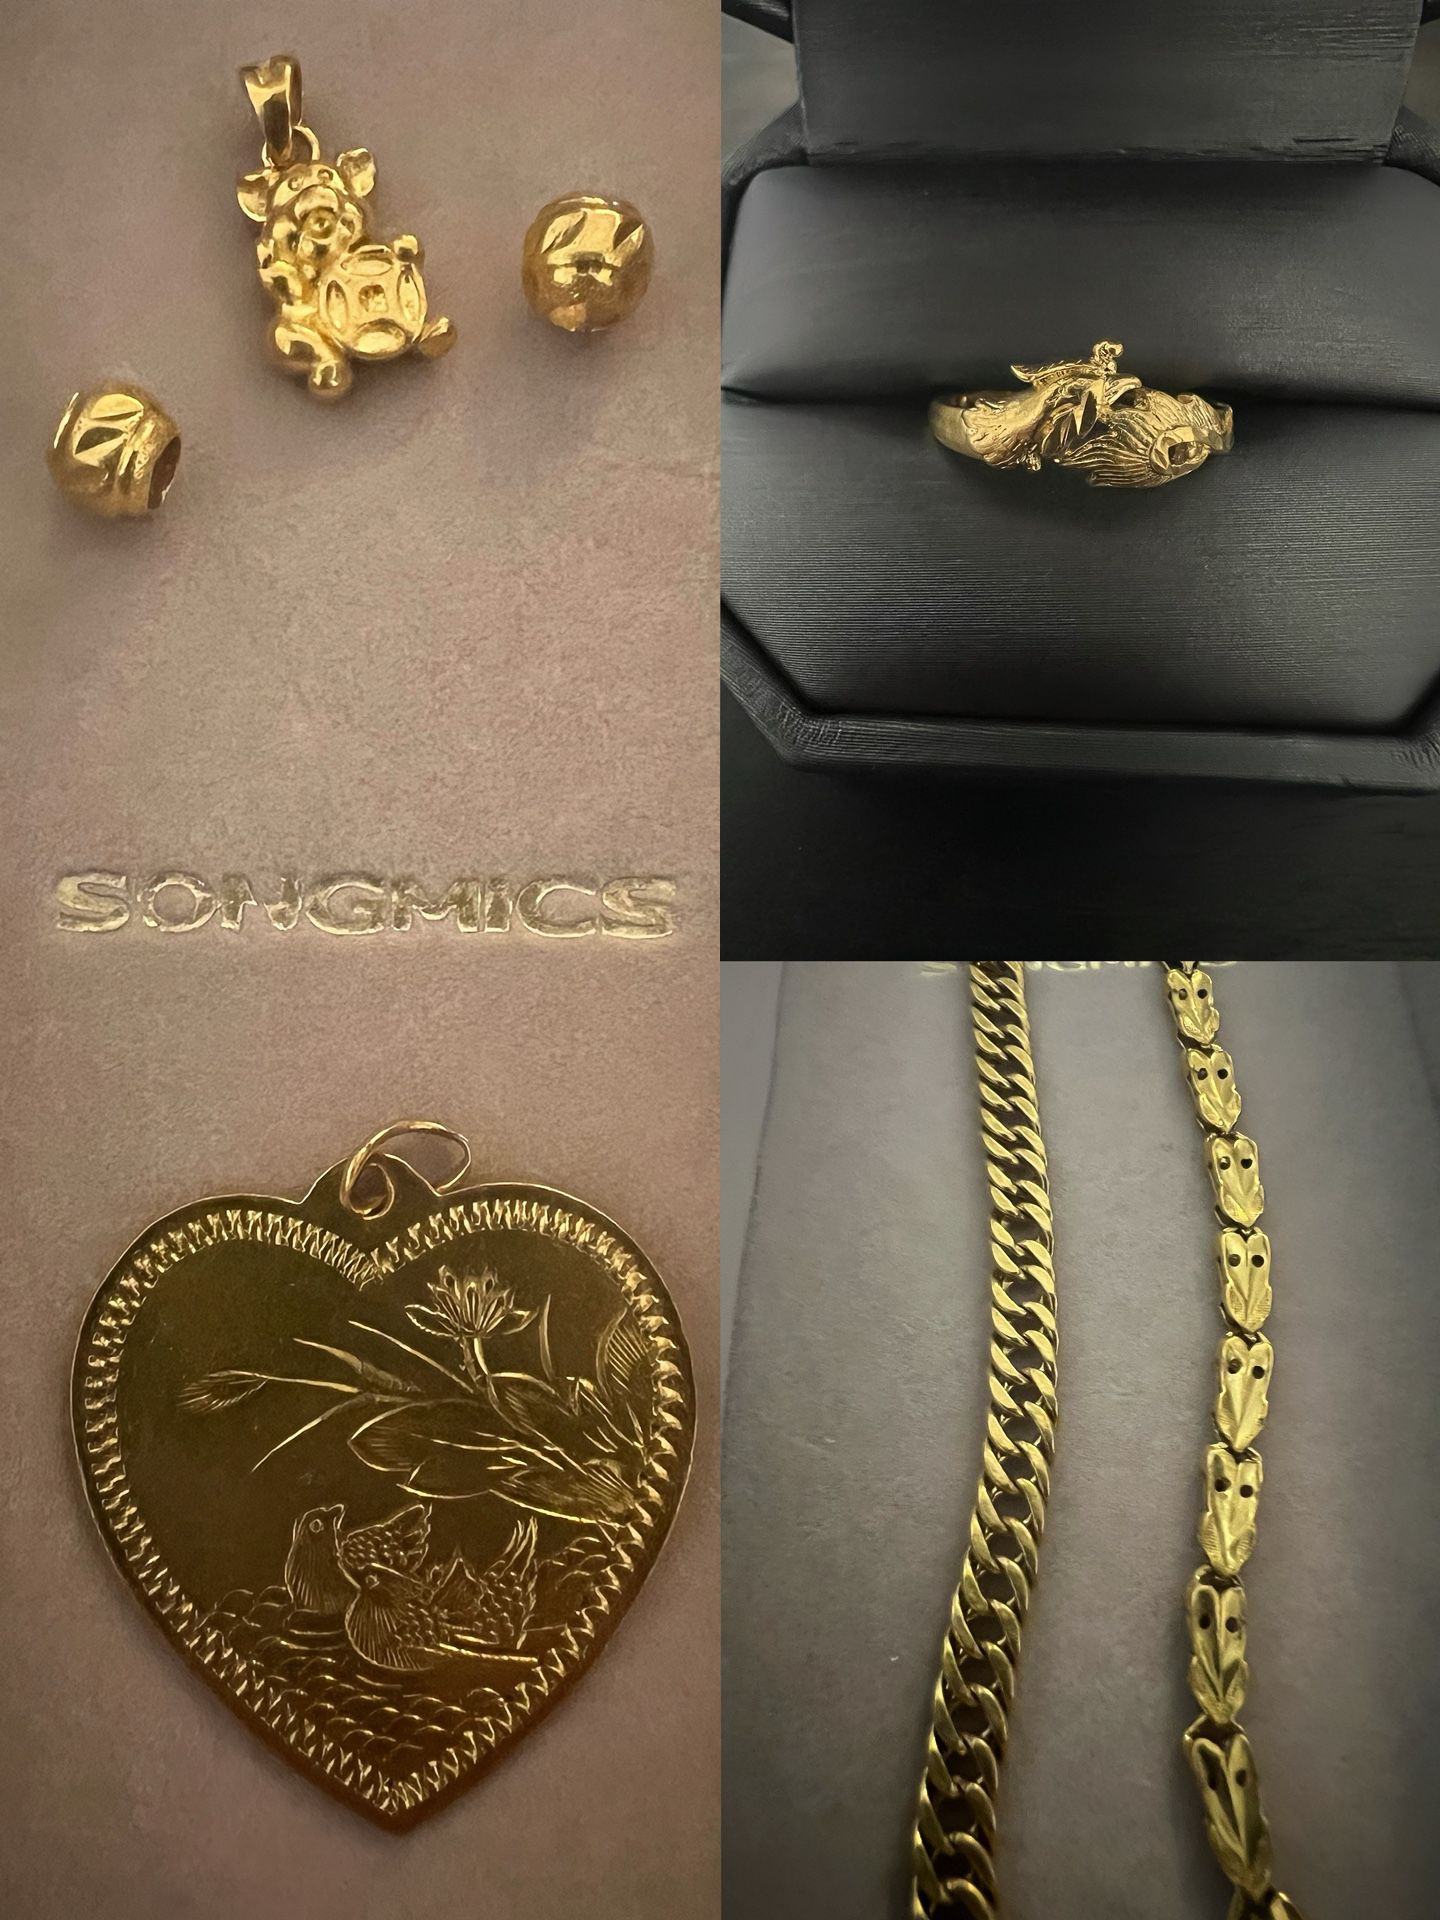 24k (999)Pure Gold Jewelries Includes Clasp